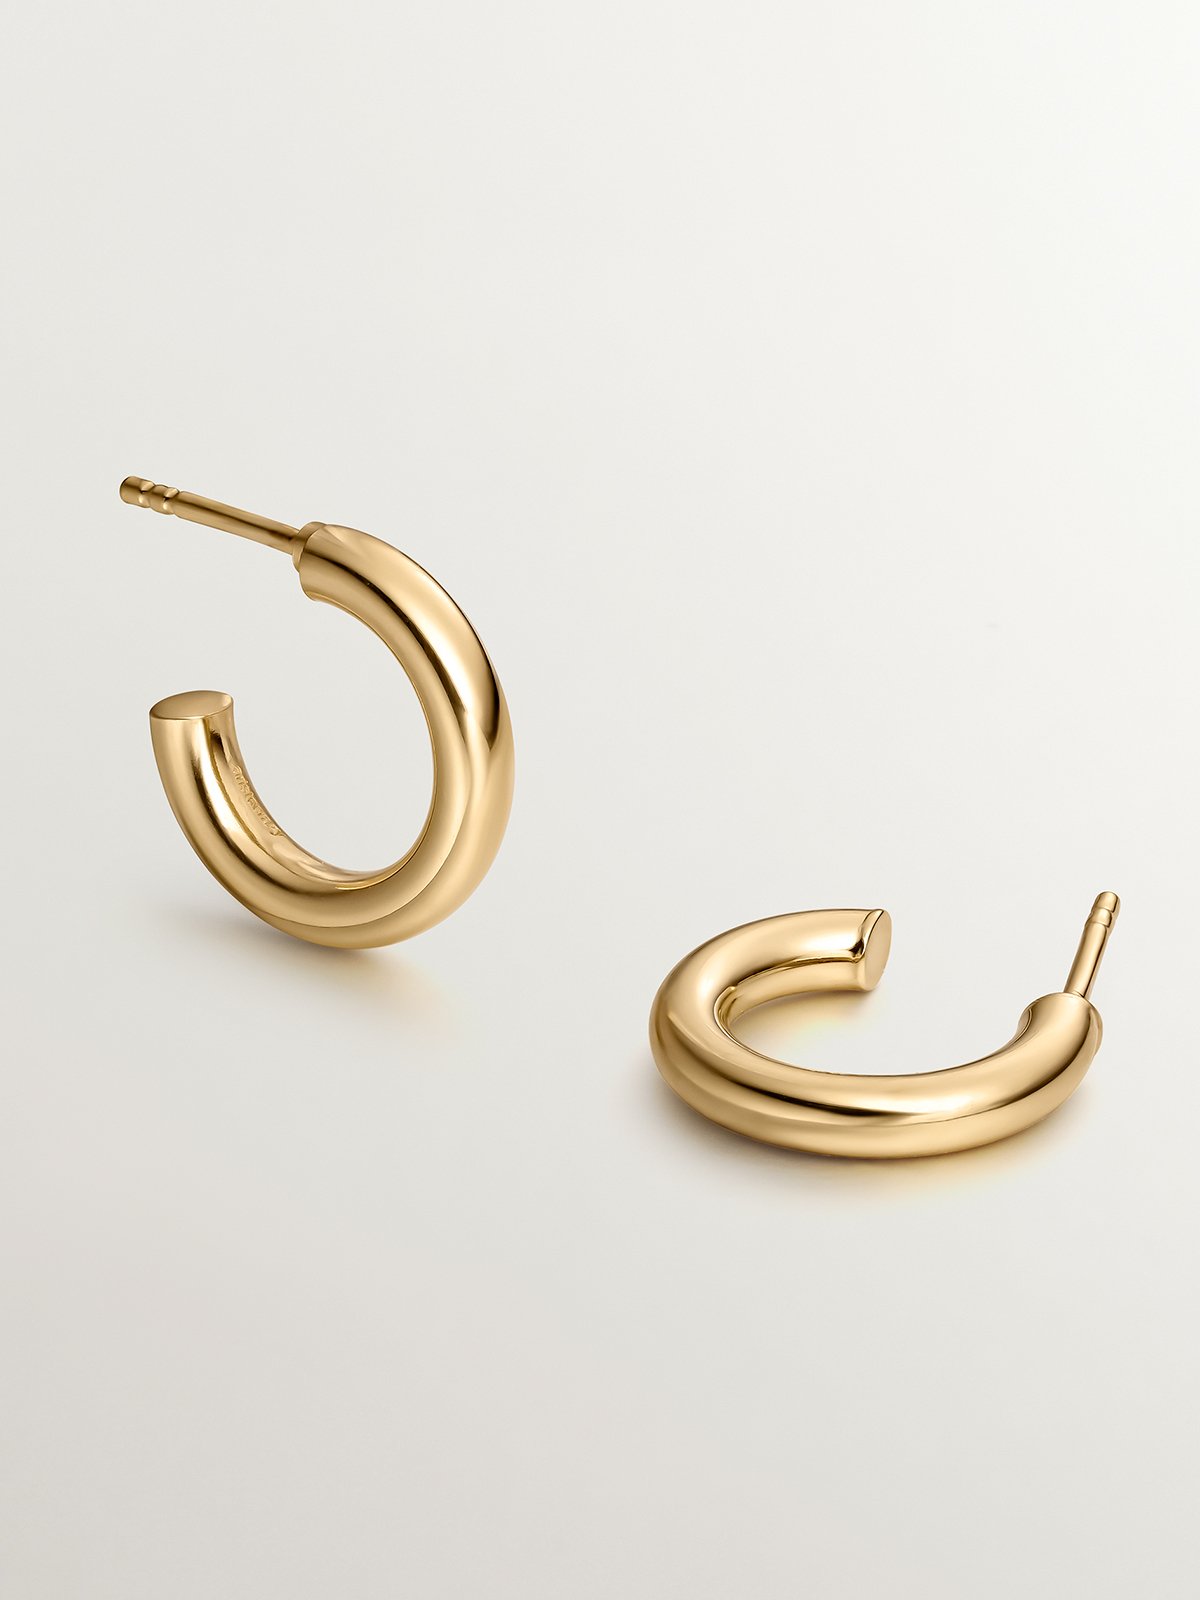 Small hoop earrings made of 925 silver bathed in 18K yellow gold.